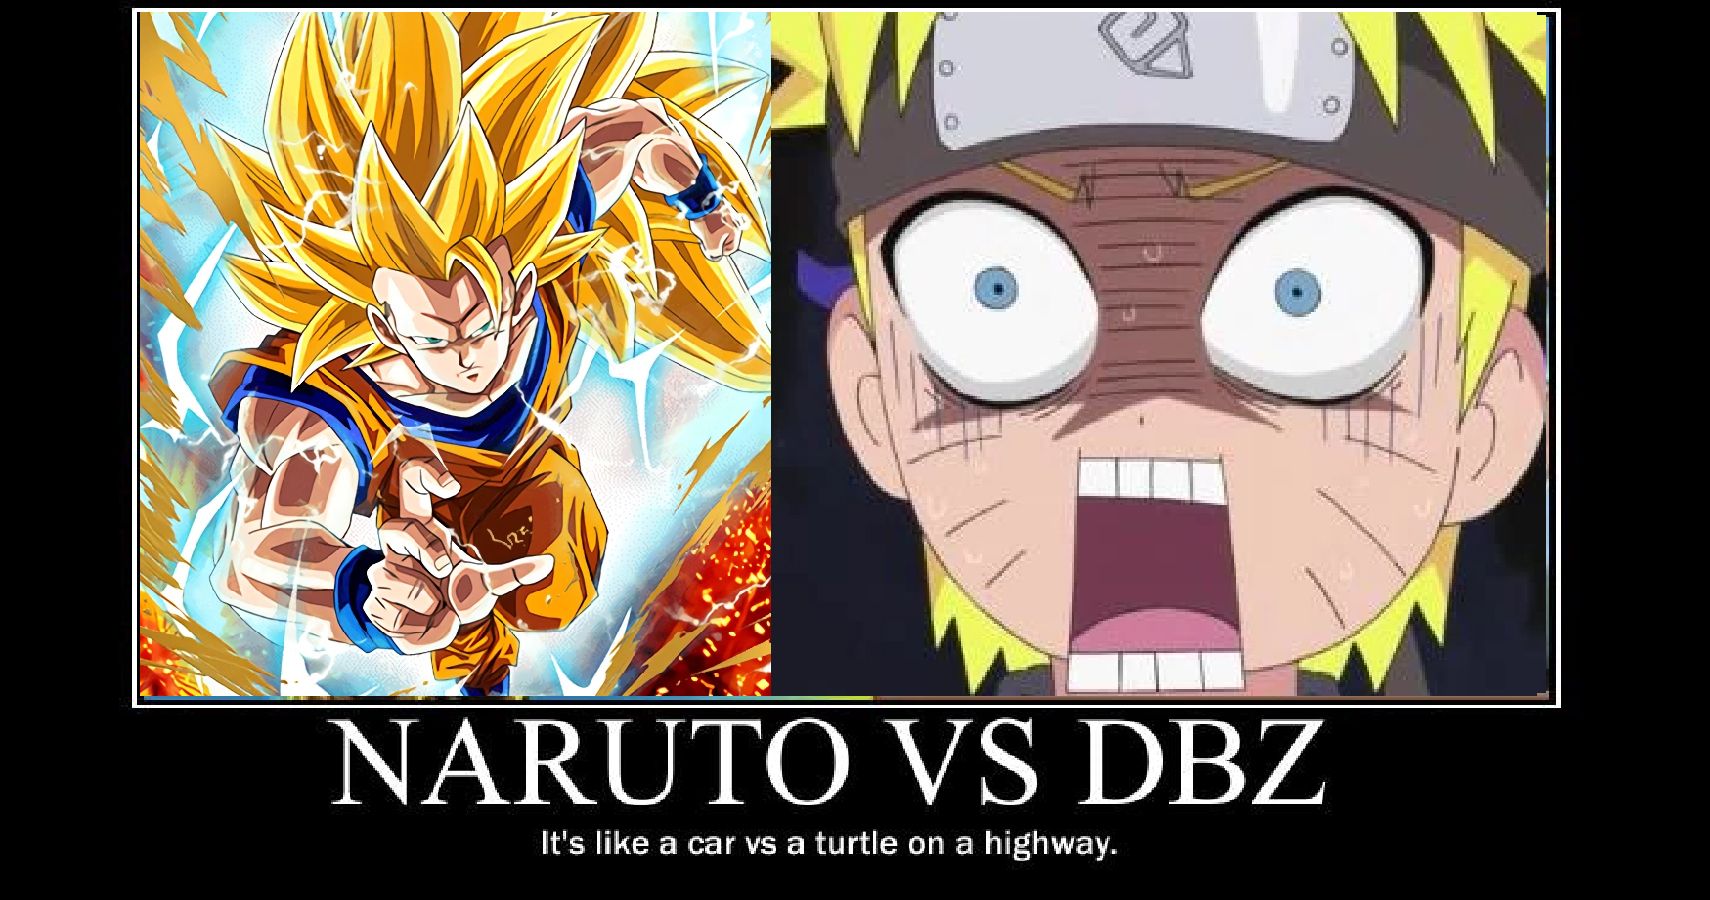 Hilarious Dragon Ball Vs Naruto Memes That Will Leave You Laughing. www.the...